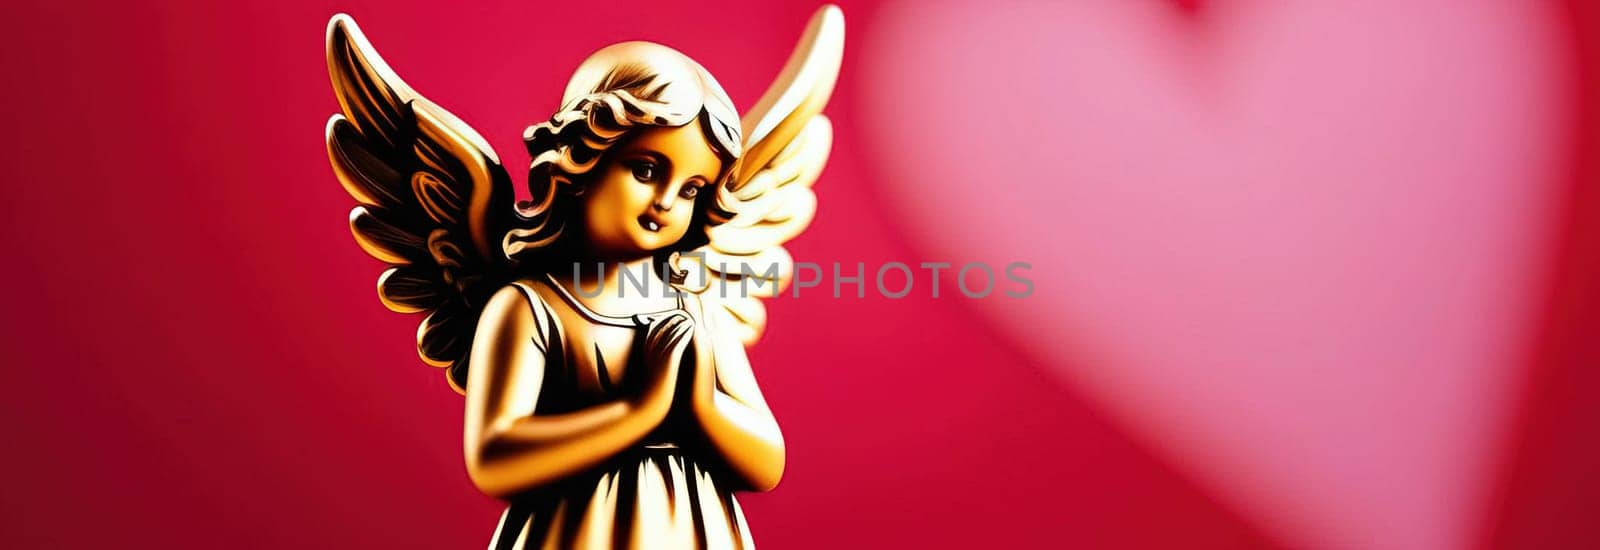 Illustration of greeting card of figurine of cute, funny baby cupid angel with gold curly hair on pastel colors background. Promotion, shopping template for love and valentines, mothers day concept